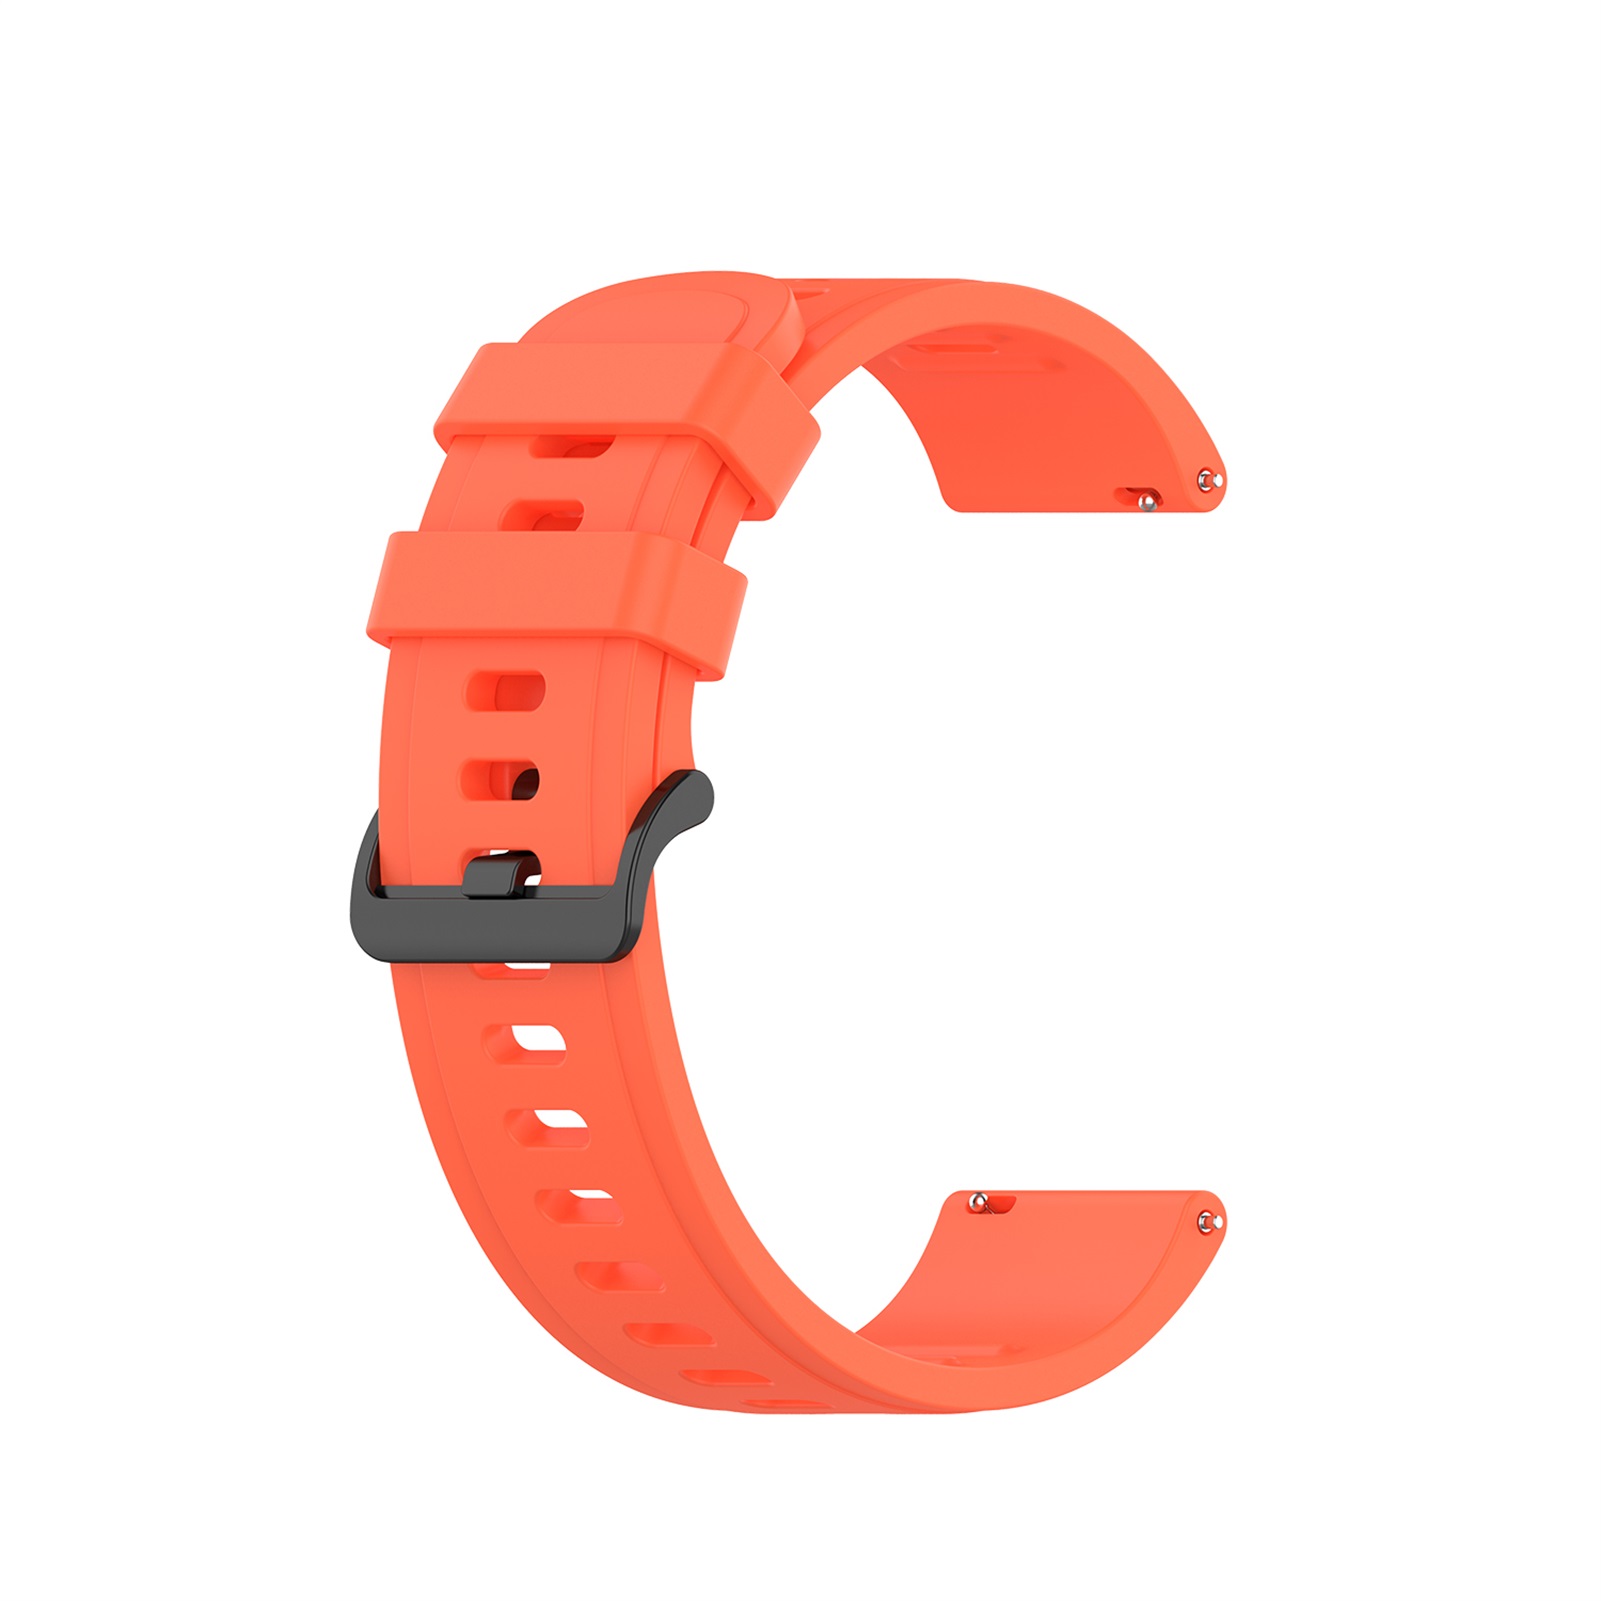 Bakeey-20mm-Multi-color-Silicone-Smart-Watch-Band-Replacement-Strap-For-Zeblaze-GTR--Haylou-LS02-1785338-28